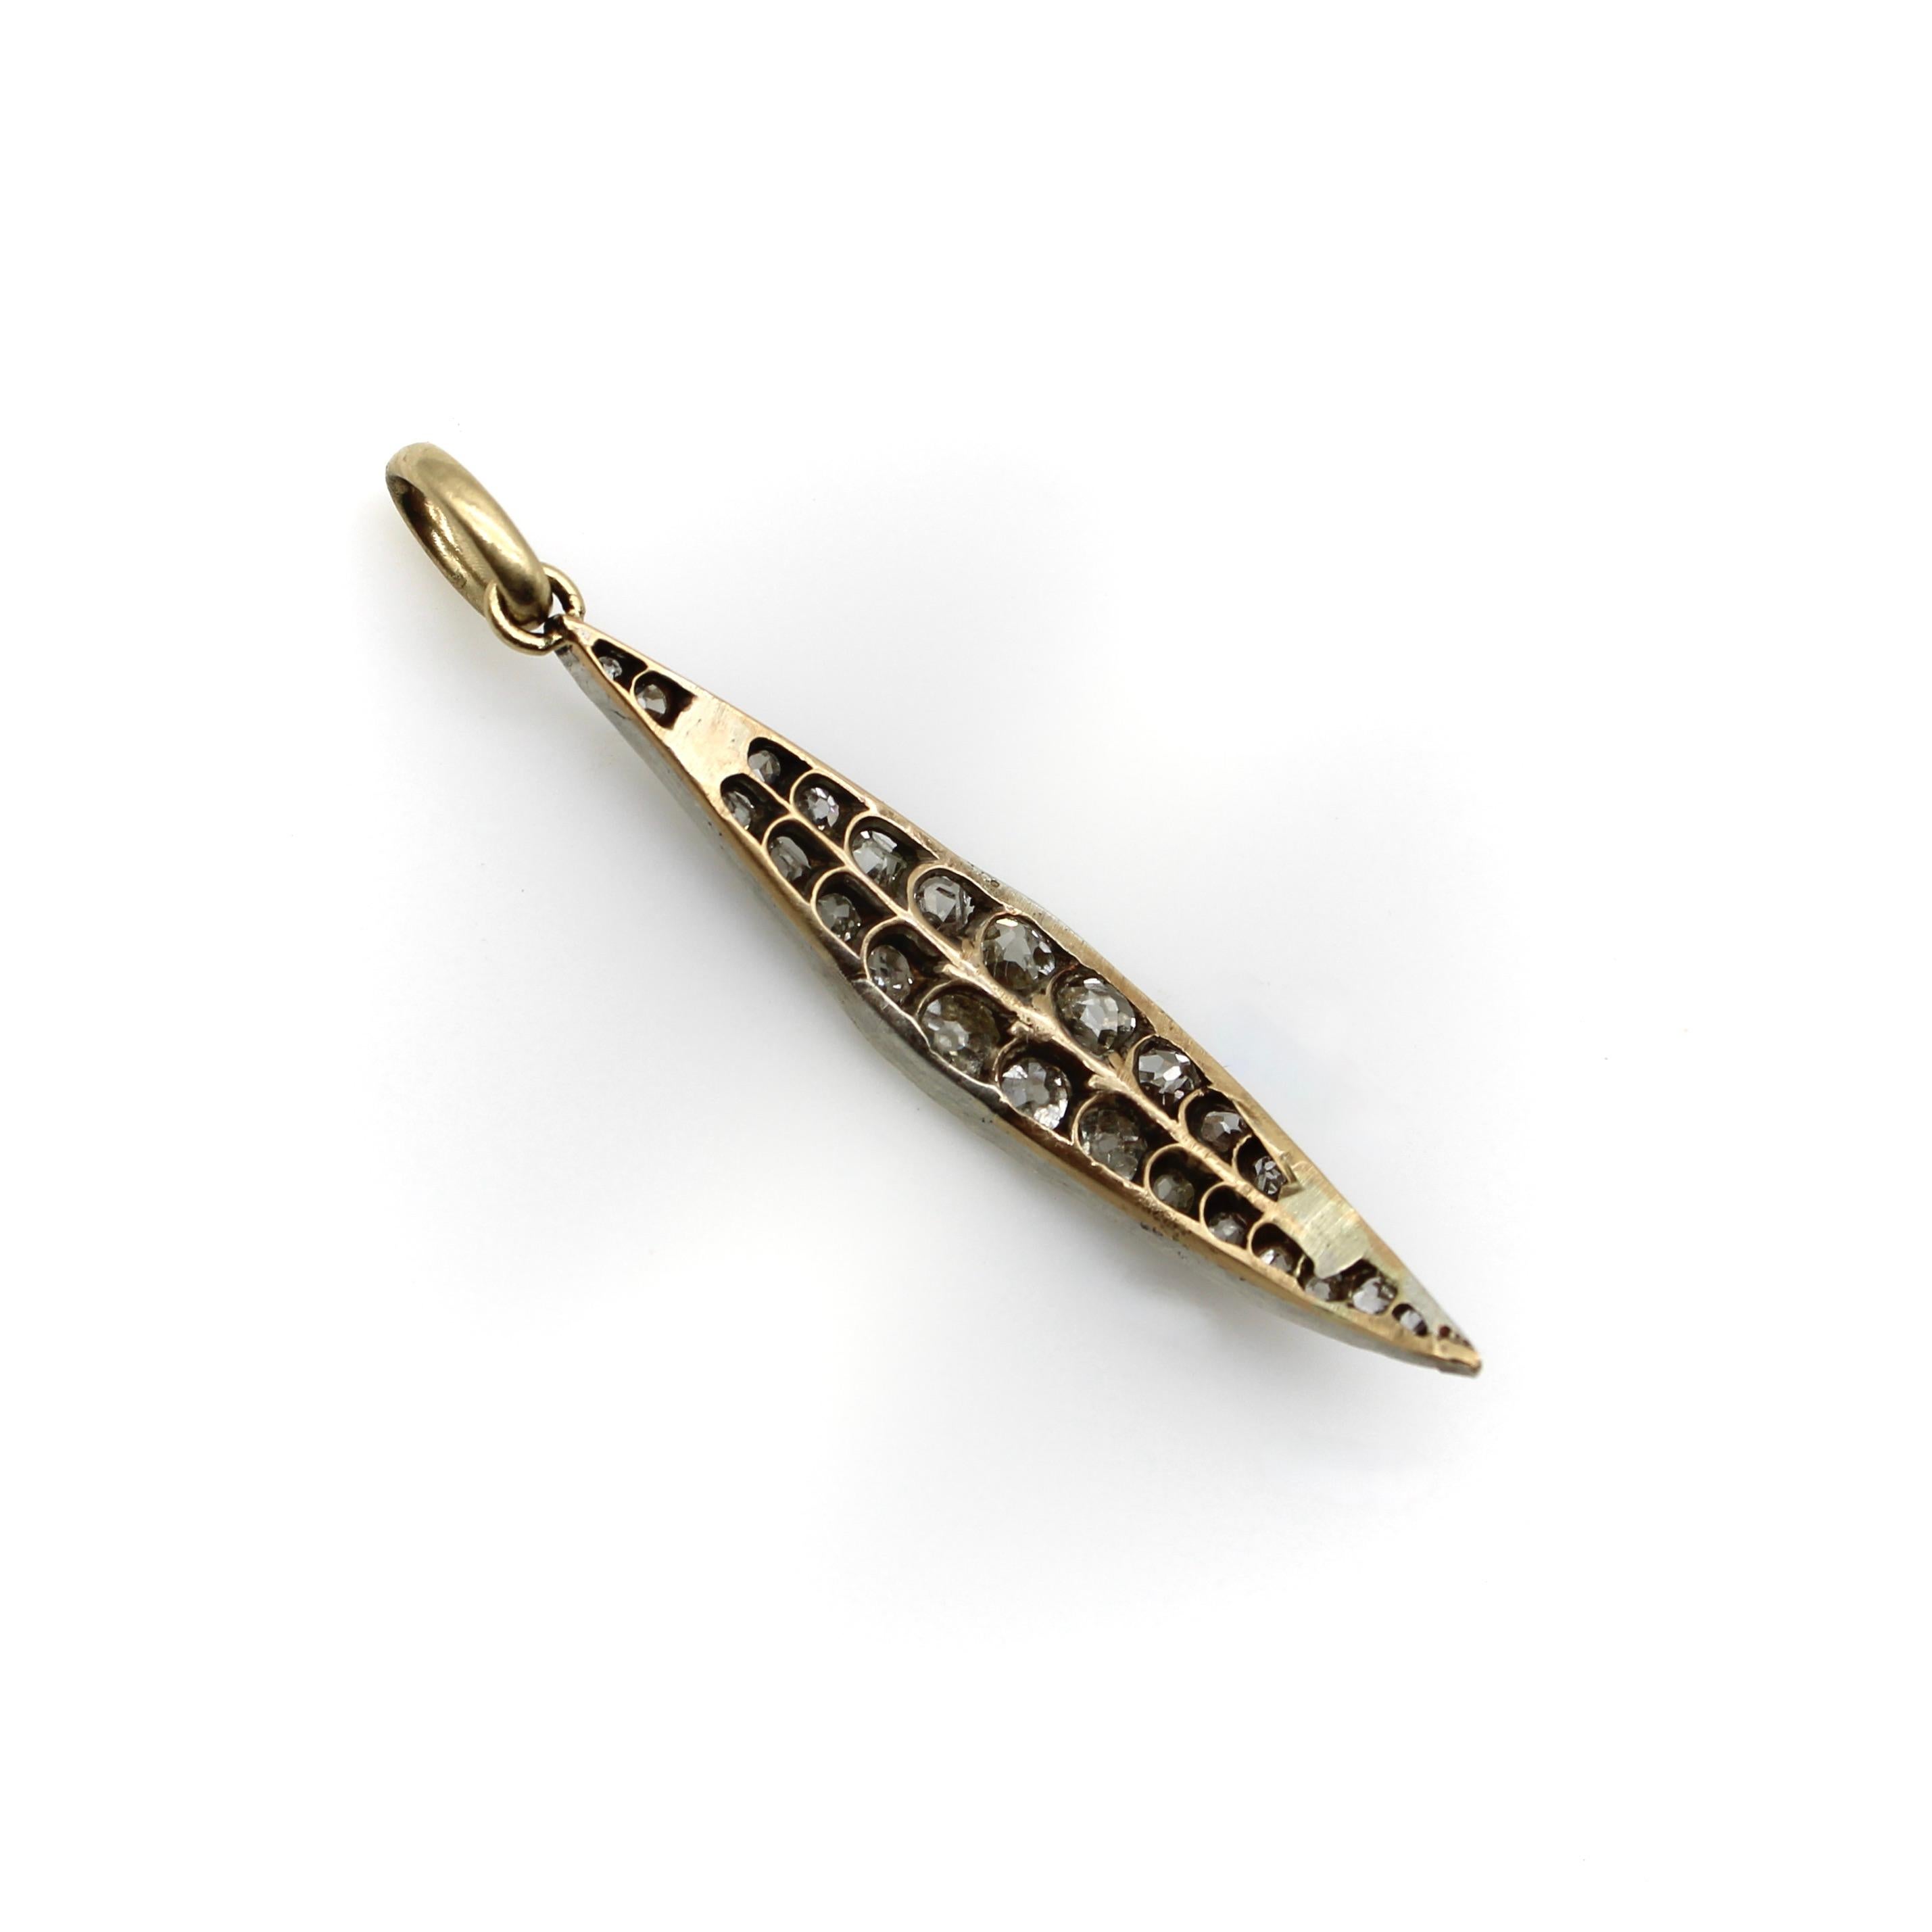 This extraordinary leaf-shaped pendant is studded with gorgeous chunky Old Mine Cut diamonds. We believe this was once part of a tiara and was most likely the shape that adorned the headless. We added an ample size 14k gold bail so that it could be